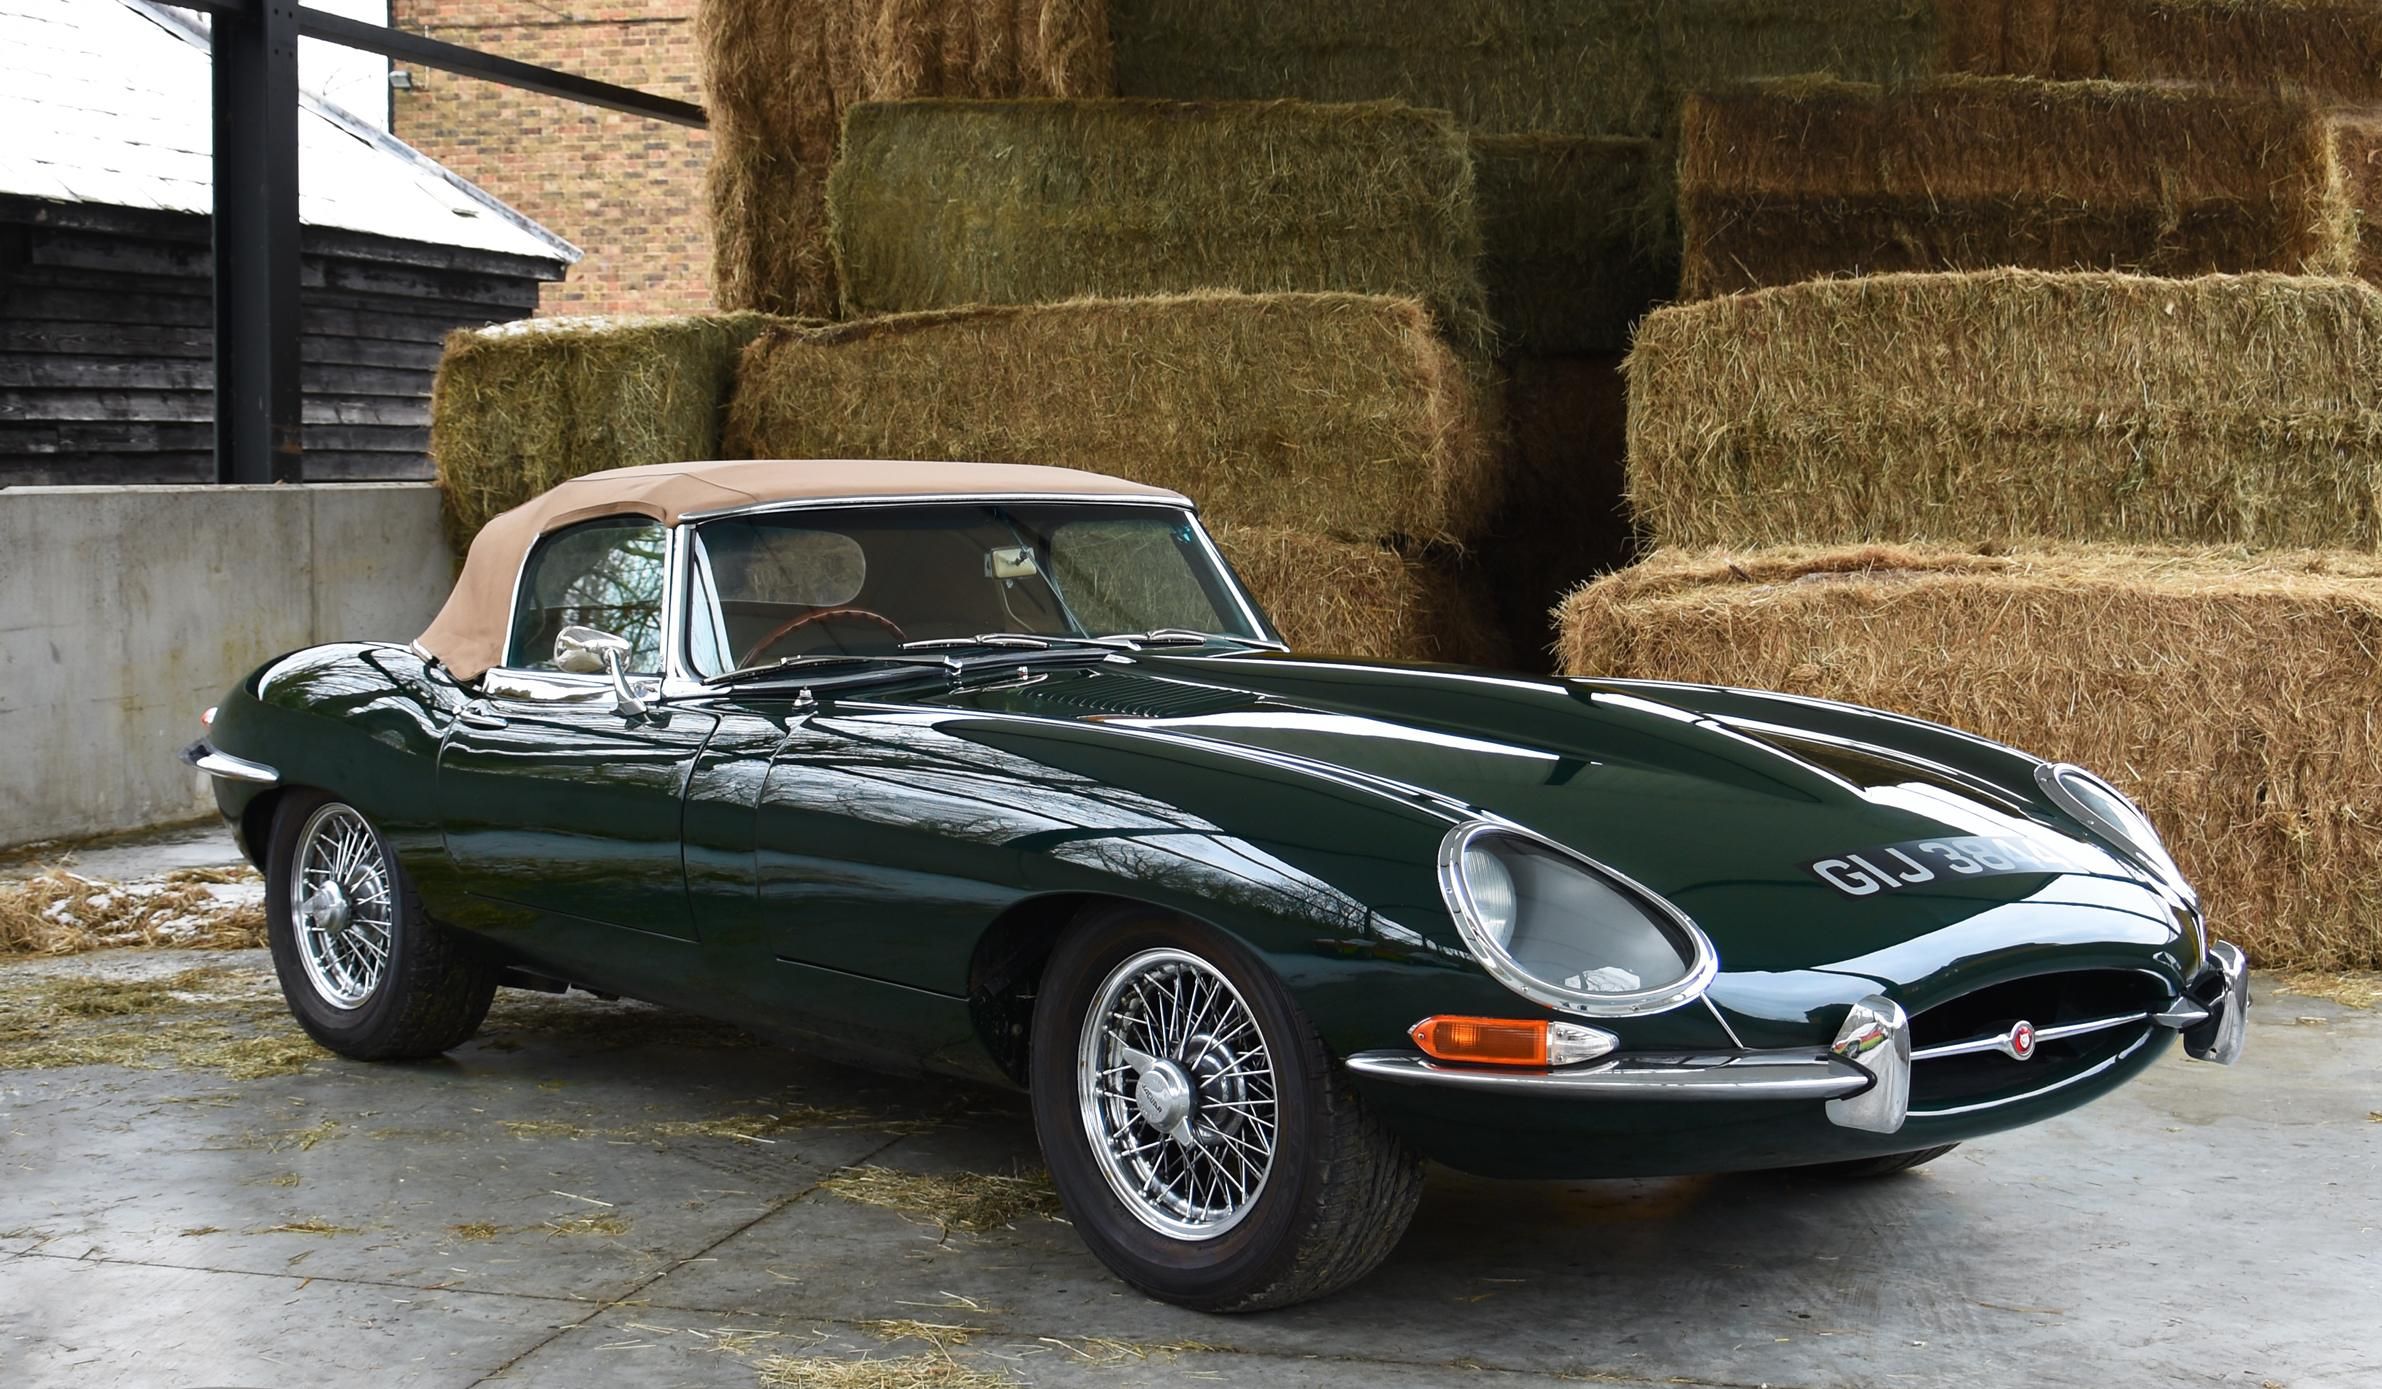 A Green Jaguar E Type in front of bales of straw